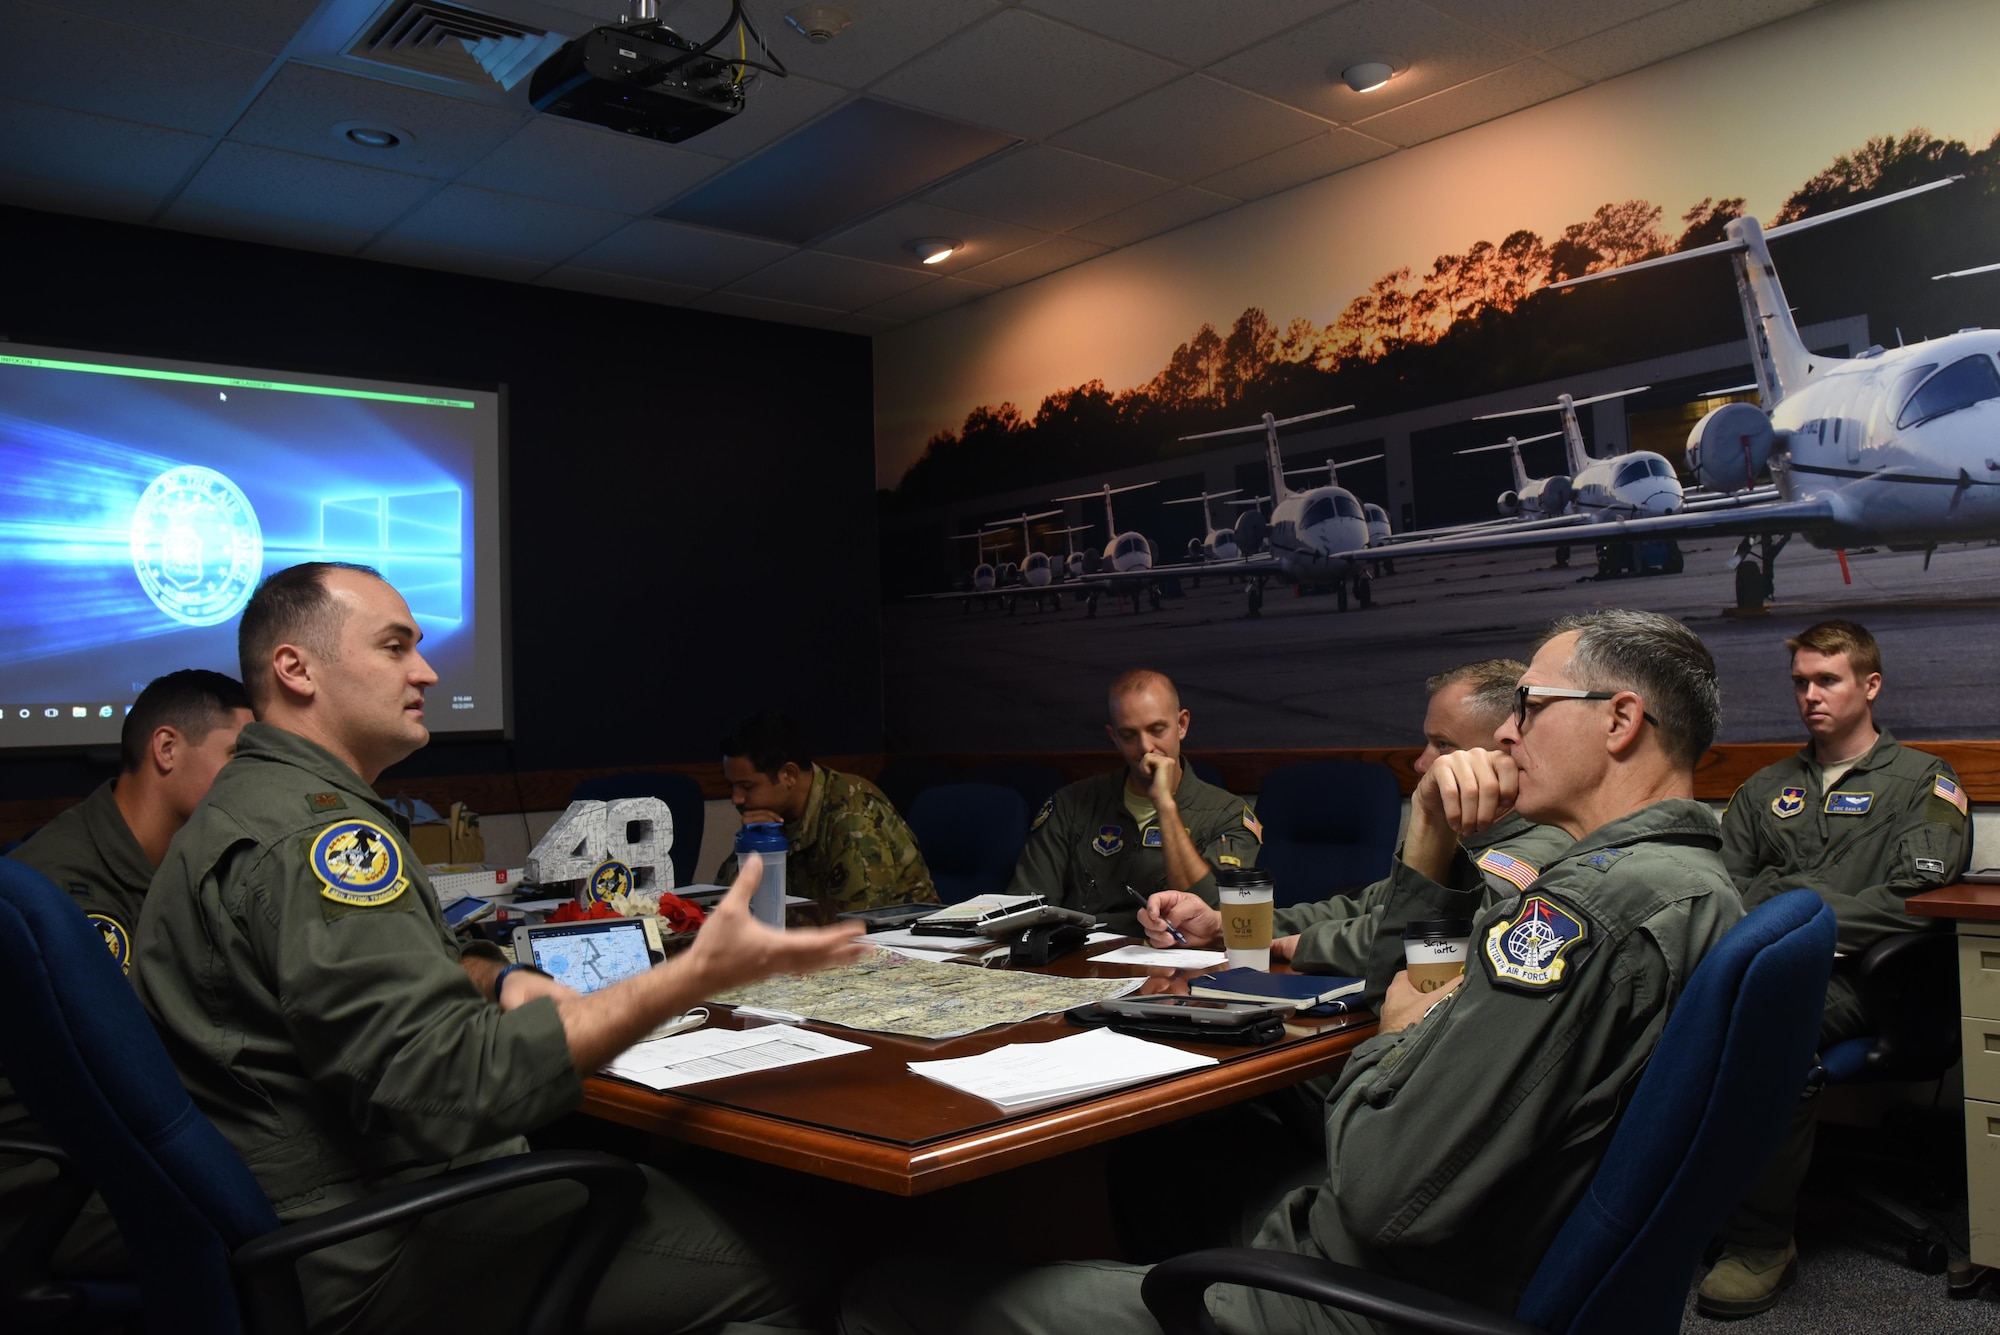 Maj. Gen. Wills, 19th Air Force commander, receives a briefing from members of the 48th Flying Training Squadron before a T-1 Jayhawk flight Oct. 2, 2019, on Columbus Air Force Base, Miss. One of the highlights of the visit for Wills was flying with the 48th Flying Training Squadron in the T-1 Jayhawk out of the Golden Triangle Regional Airport. (U.S. Air Force photo by Airman 1st Class Jake Jacobsen)